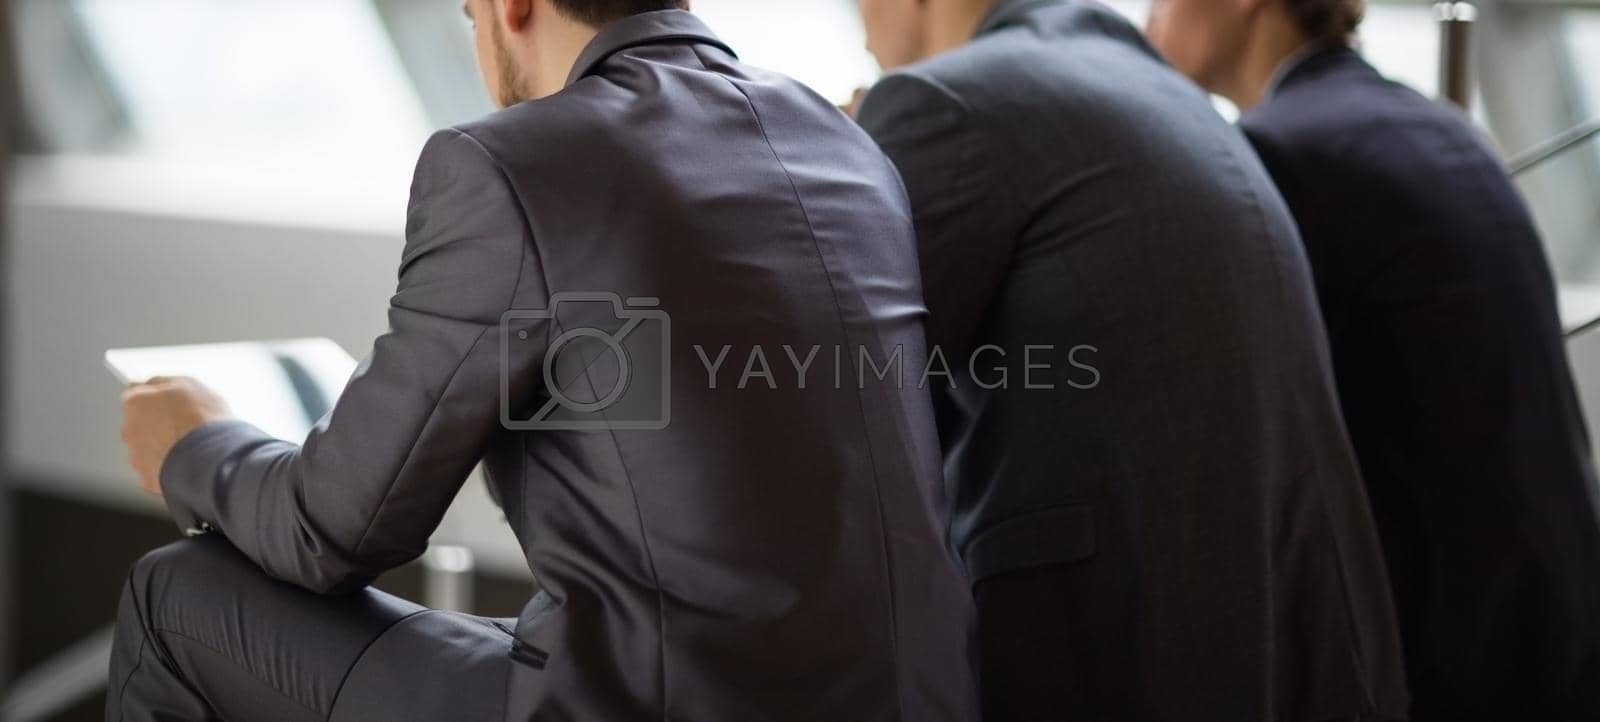 Royalty free image of Portrait of smart business partners communicating at meeting by SmartPhotoLab